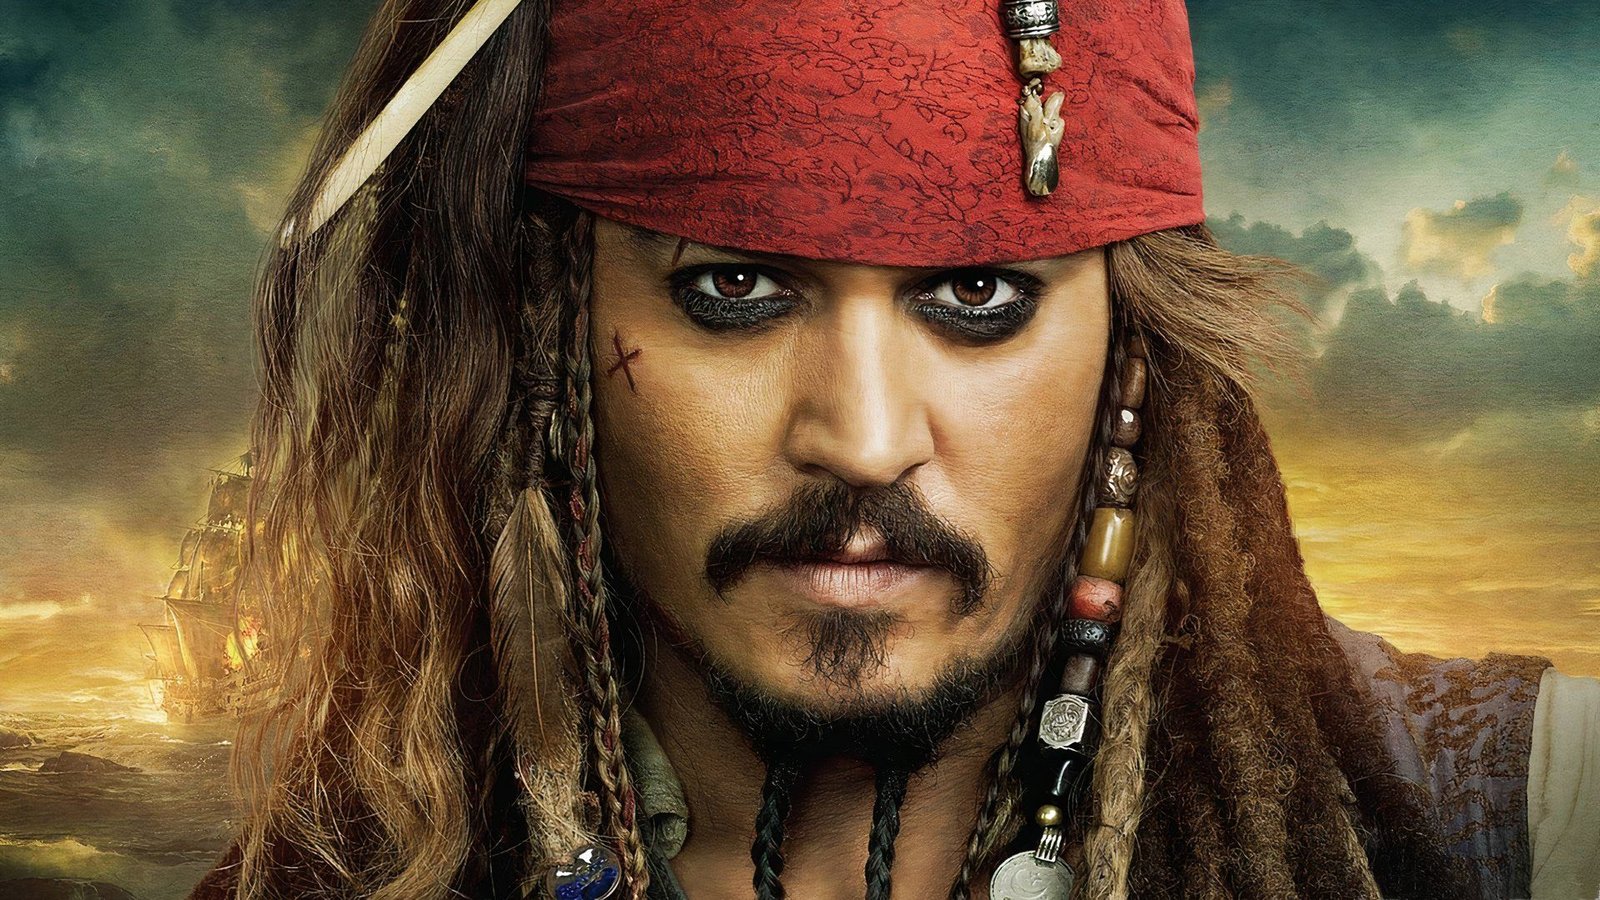 Johnny Depp Will Return as Jack Sparrow if Pirates of the Caribbean Producer Gets His Way